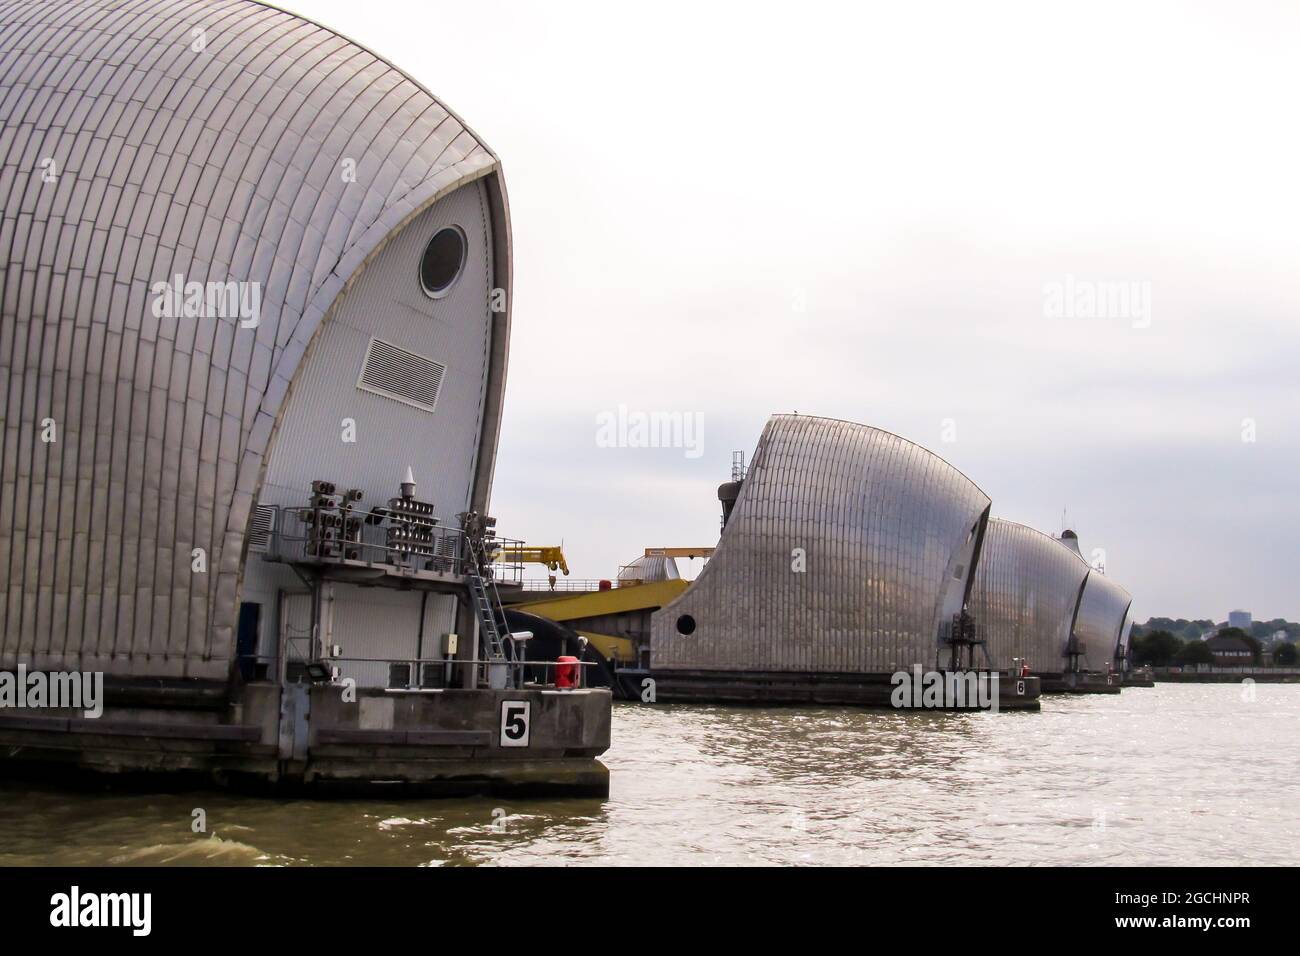 Looking along the line of the Steel-clad shells of the gates of the Thames barrier in the Thames estuary at Silvertown Greater London, UK Stock Photo